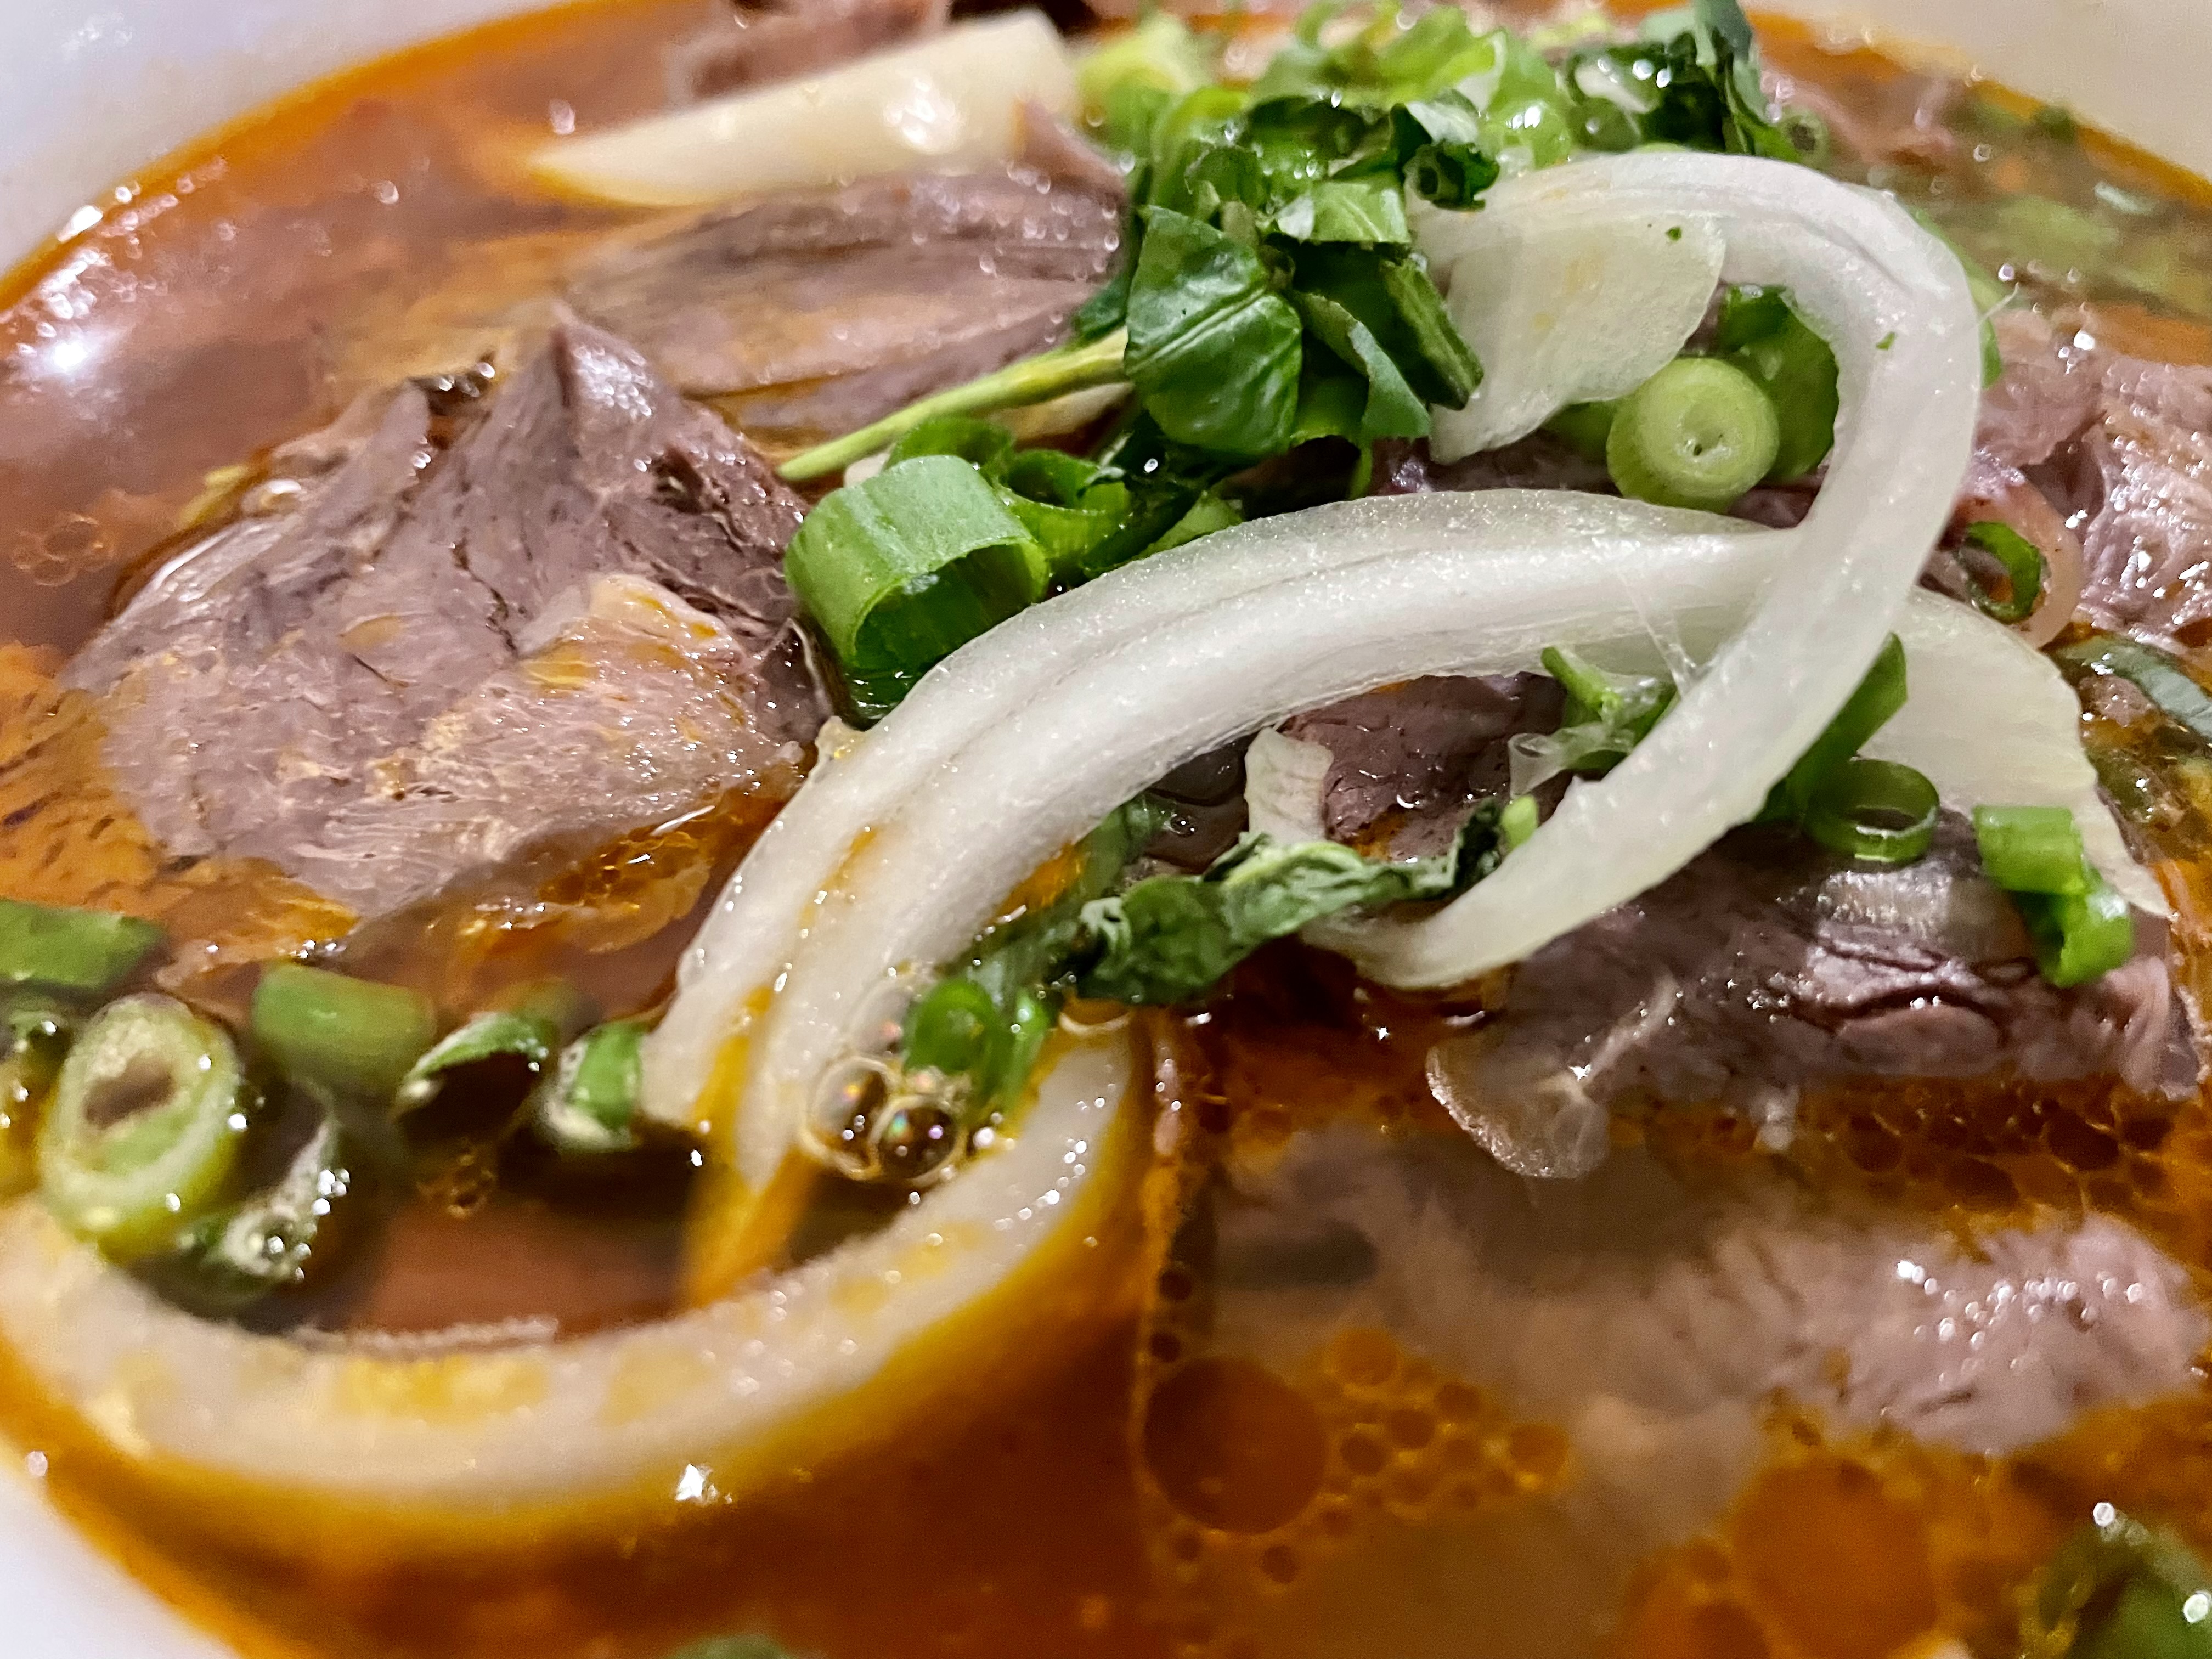 A number of reviews online said the Bún bò Huế was one of the restaurant's most well-loved items